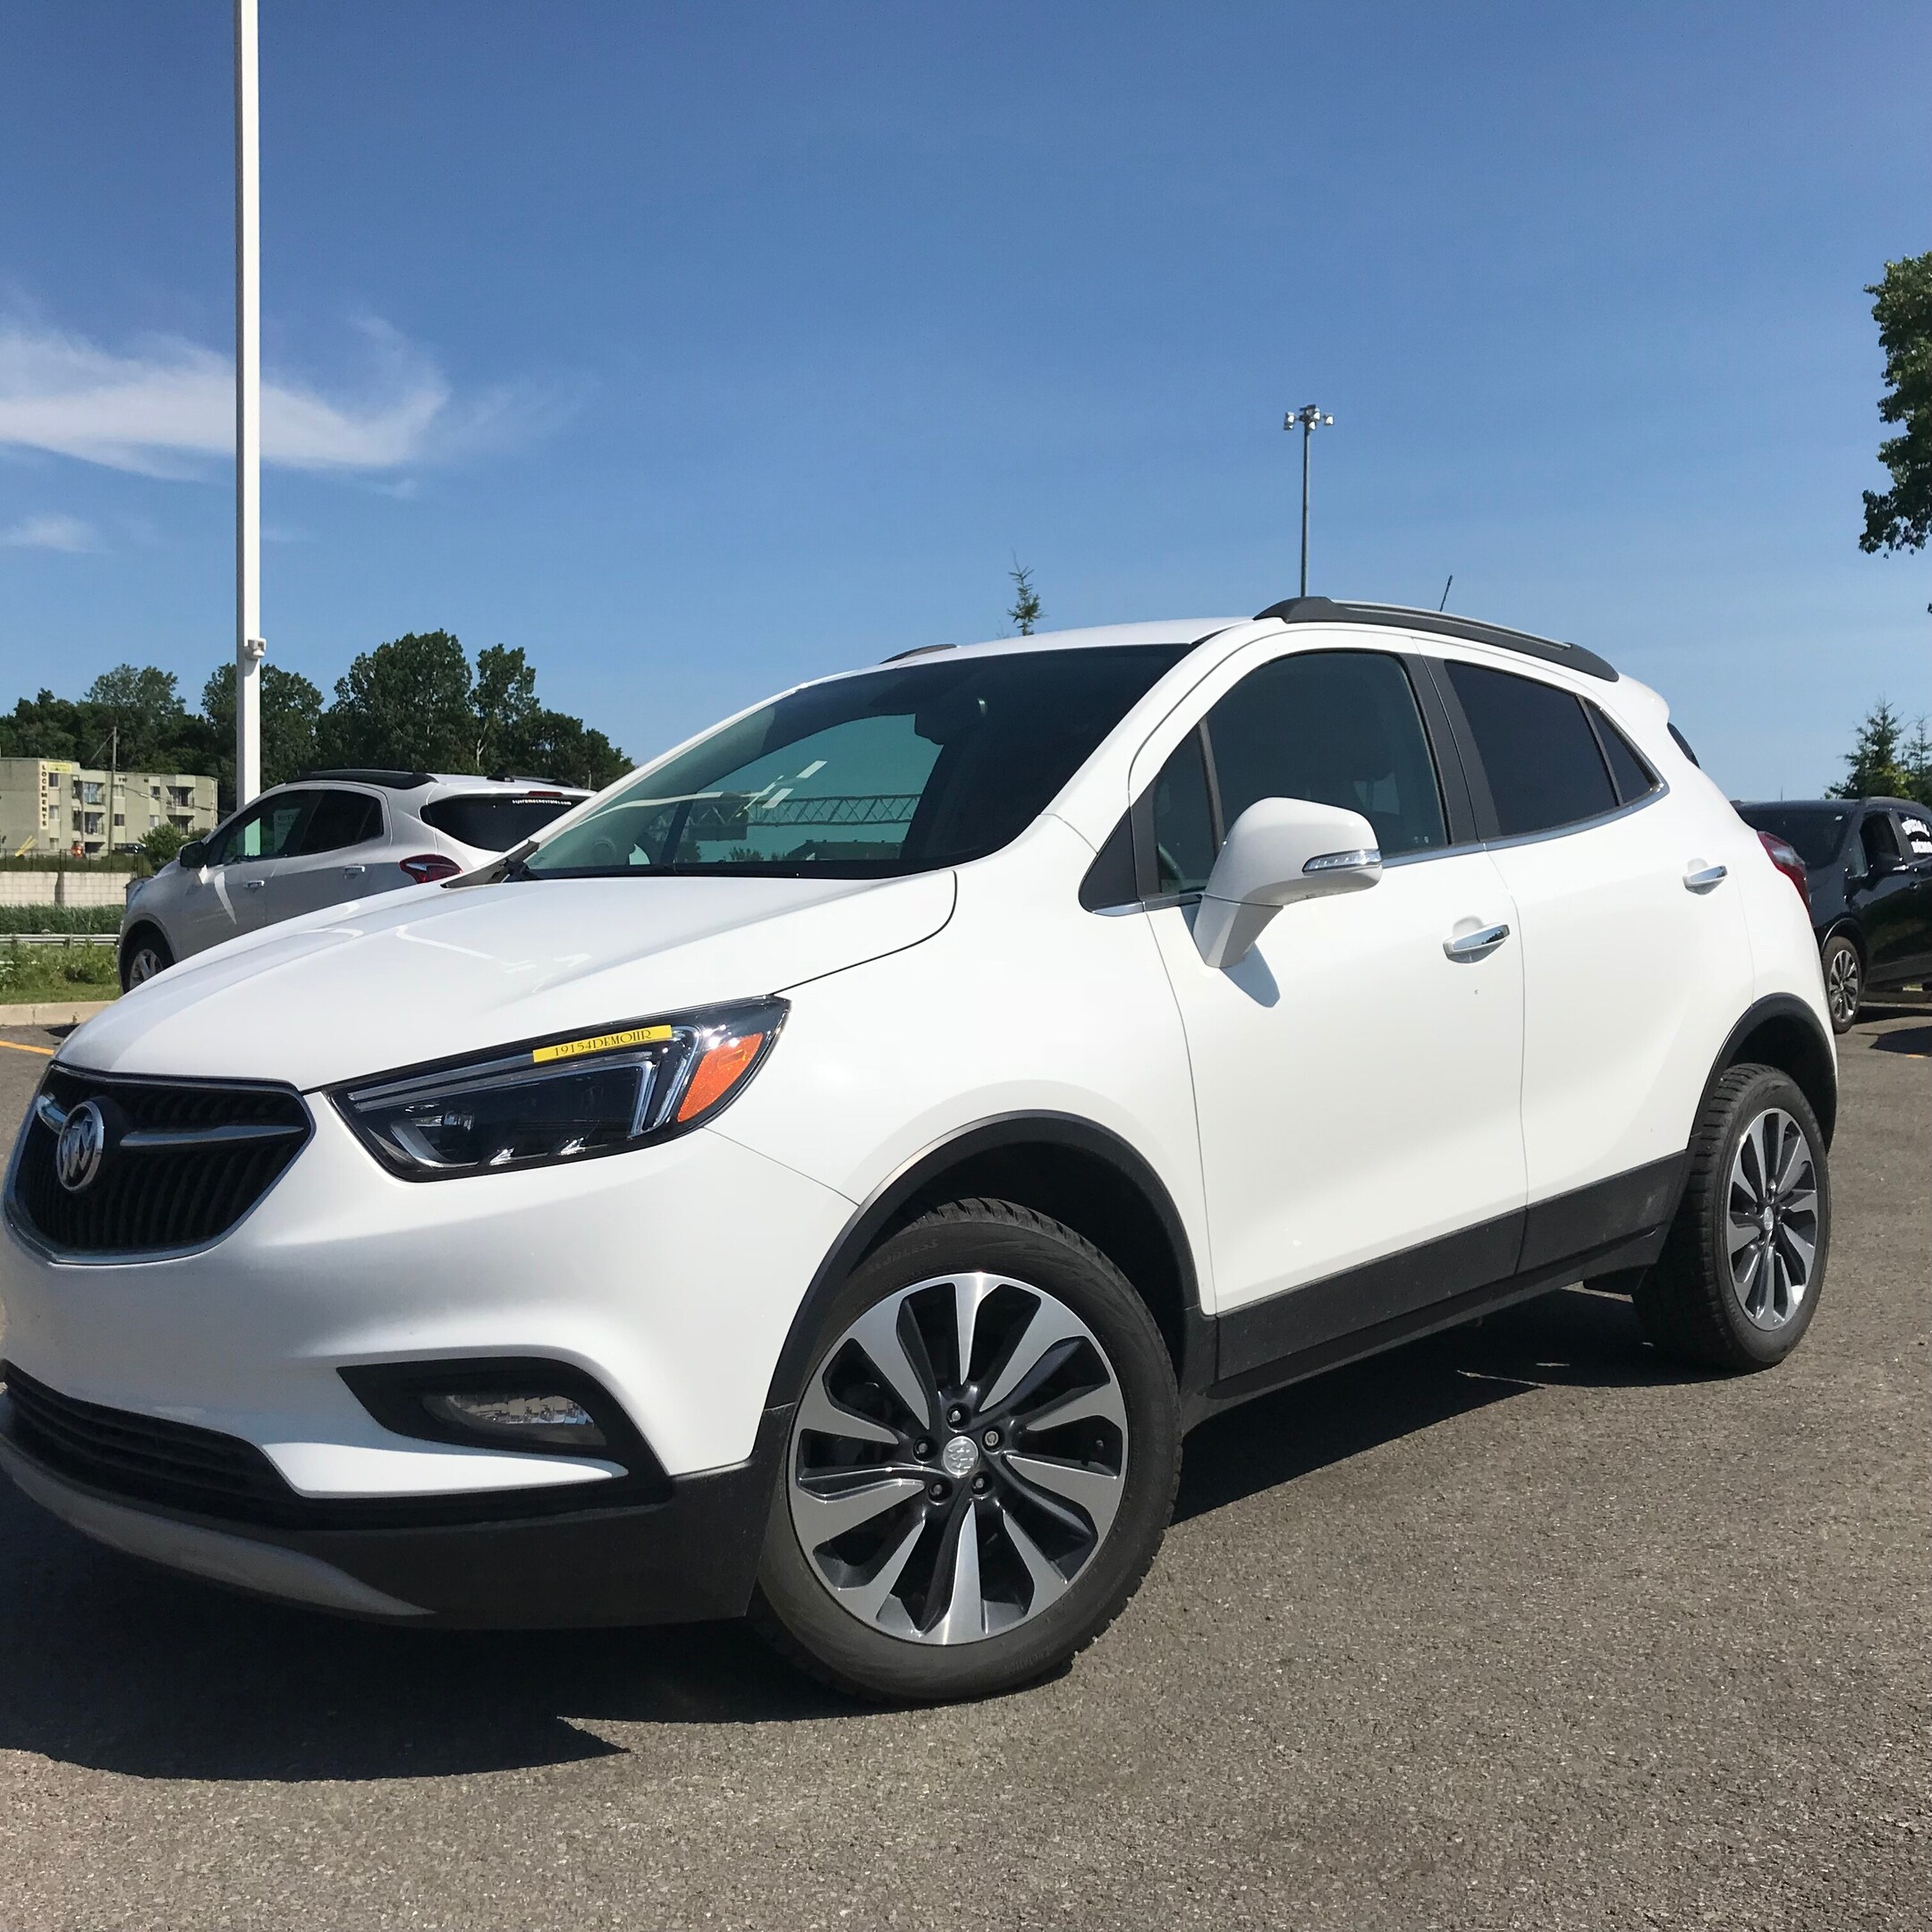  Buick Encore CUIR AWD SIEGES